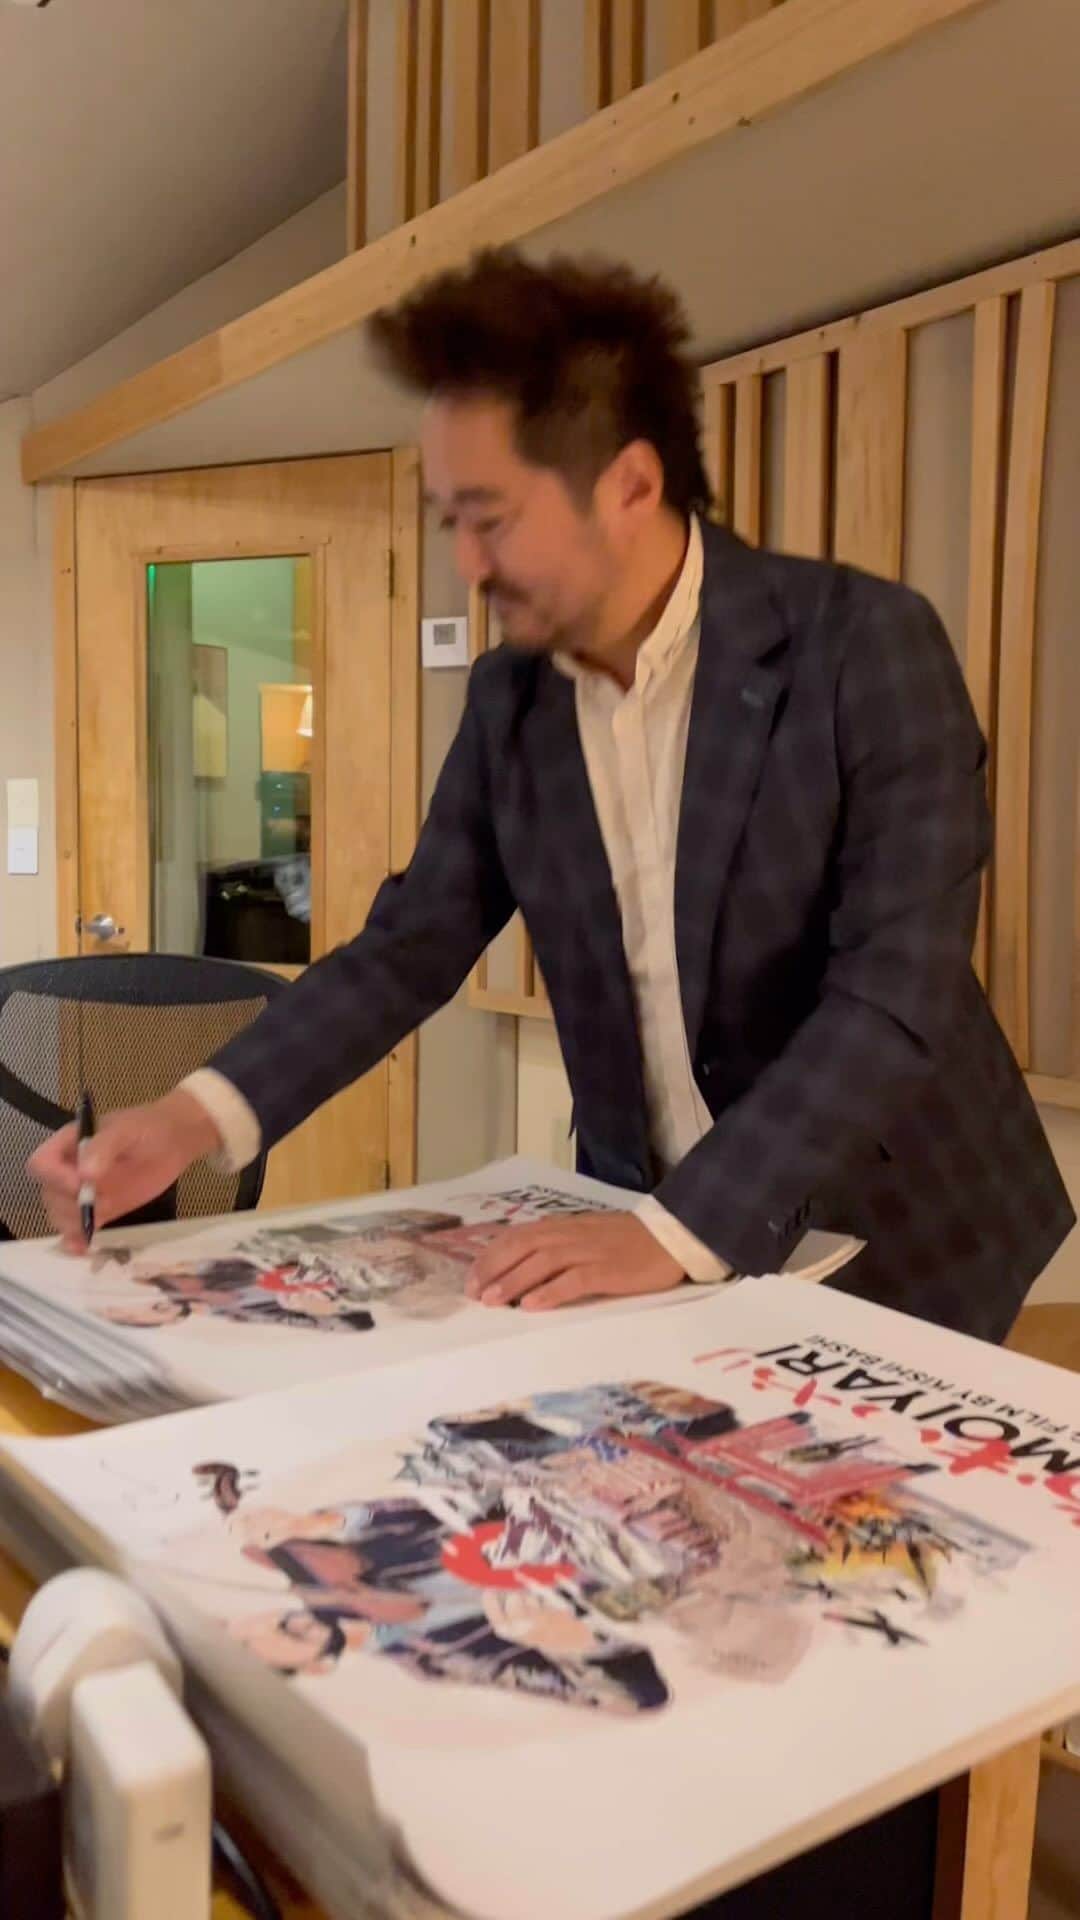 Kishi Bashiのインスタグラム：「The amazing @iheartjlp made these super epic @omoiyarisongfilm posters for all you Indigogo “Poster Boy” supporters! WE HAVE NEWS AND WE NEED YOU TO RESPOND WITH YOUR CURRENT MAILING ADDRESS, among other updates!  It will be from “roomfordream@gmail.com” 🎶  And that’s @fraser.blanchflower laying down some funky guitars for my new album in the background along with drummer boy @jamesclarkdrums and ace of bass @_quinnhumphreys .  Thinking about lunch is @vberg_industries 🍩  Also sorry to be a tease but these aren’t for sale 😗」